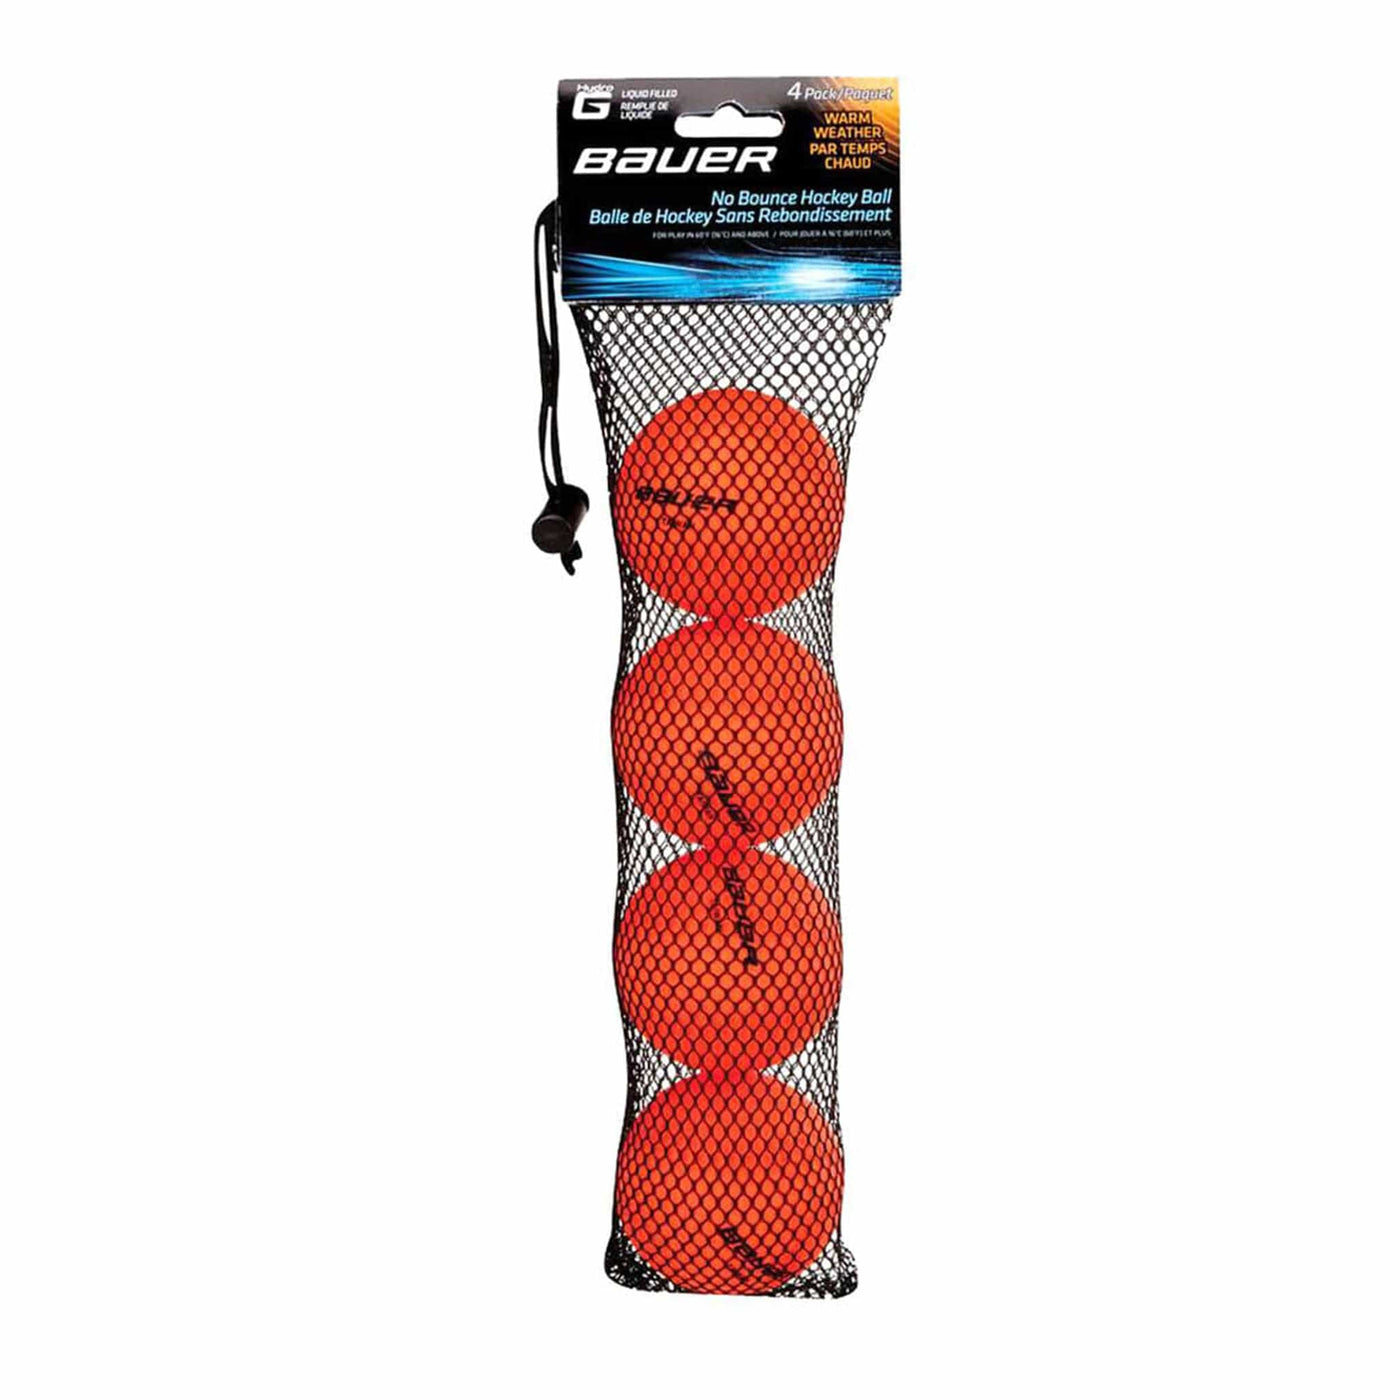 Bauer No Bounce Hockey Ball - Warm Orange (4-Pack) - The Hockey Shop Source For Sports